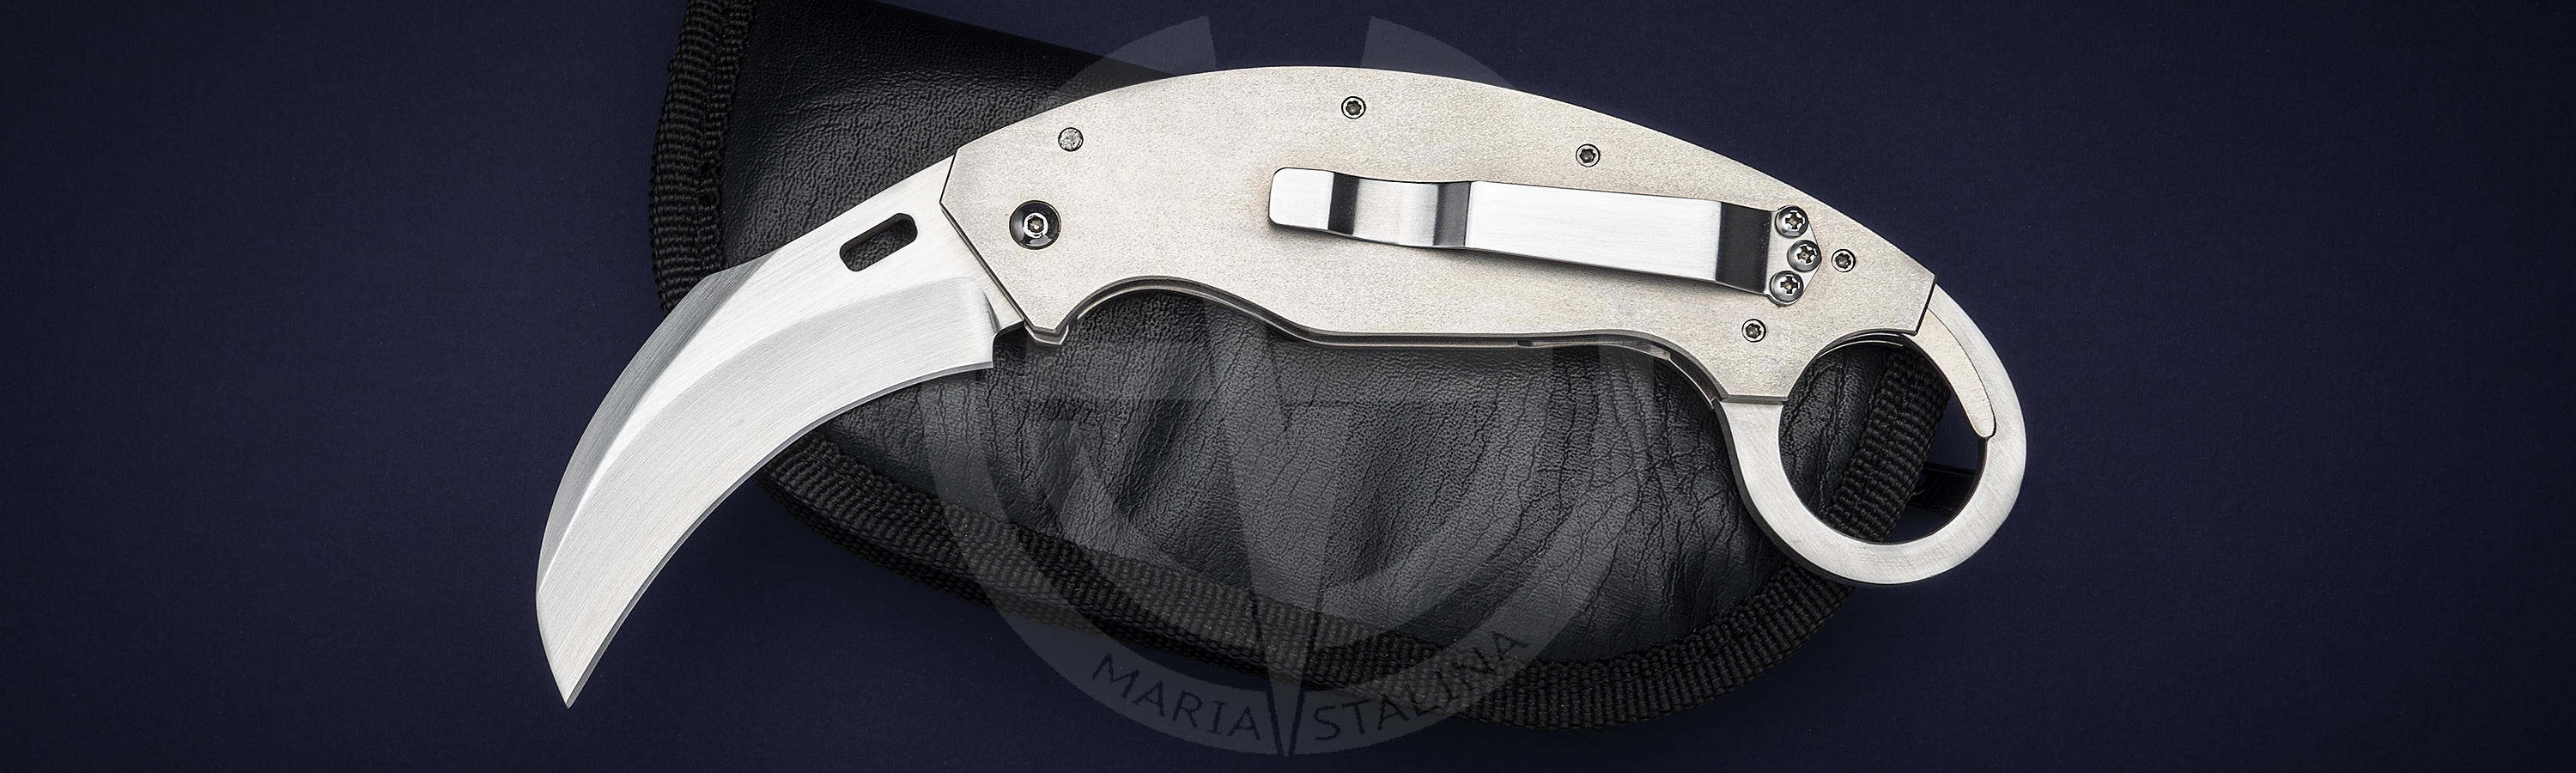 Karambit is a custom knife with the author's mechanism